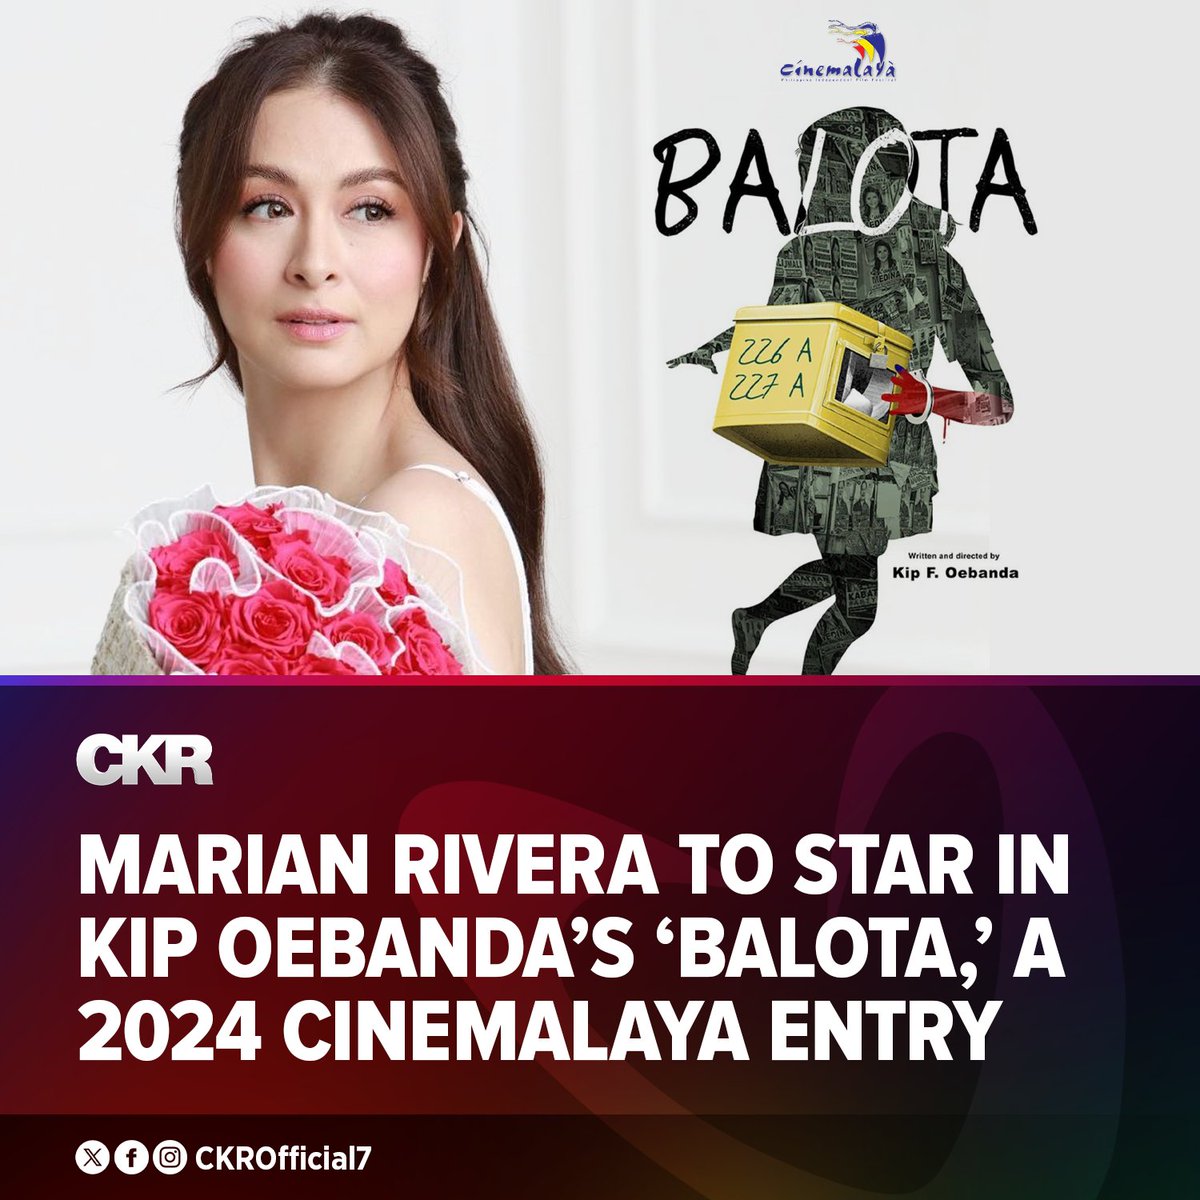 🚨 NEW MOVIE ALERT 🚨 MARIAN RIVERA TO STAR IN HER FIRST CINEMALAYA FILM, 'BALOTA' A film by Kip Oebanda (Liway, Bar Boys), 'Balota' tells the story about a land-grabbing tycoon and a former sexy male actor locked in a tight race for mayor in a small town. When violence erupts,